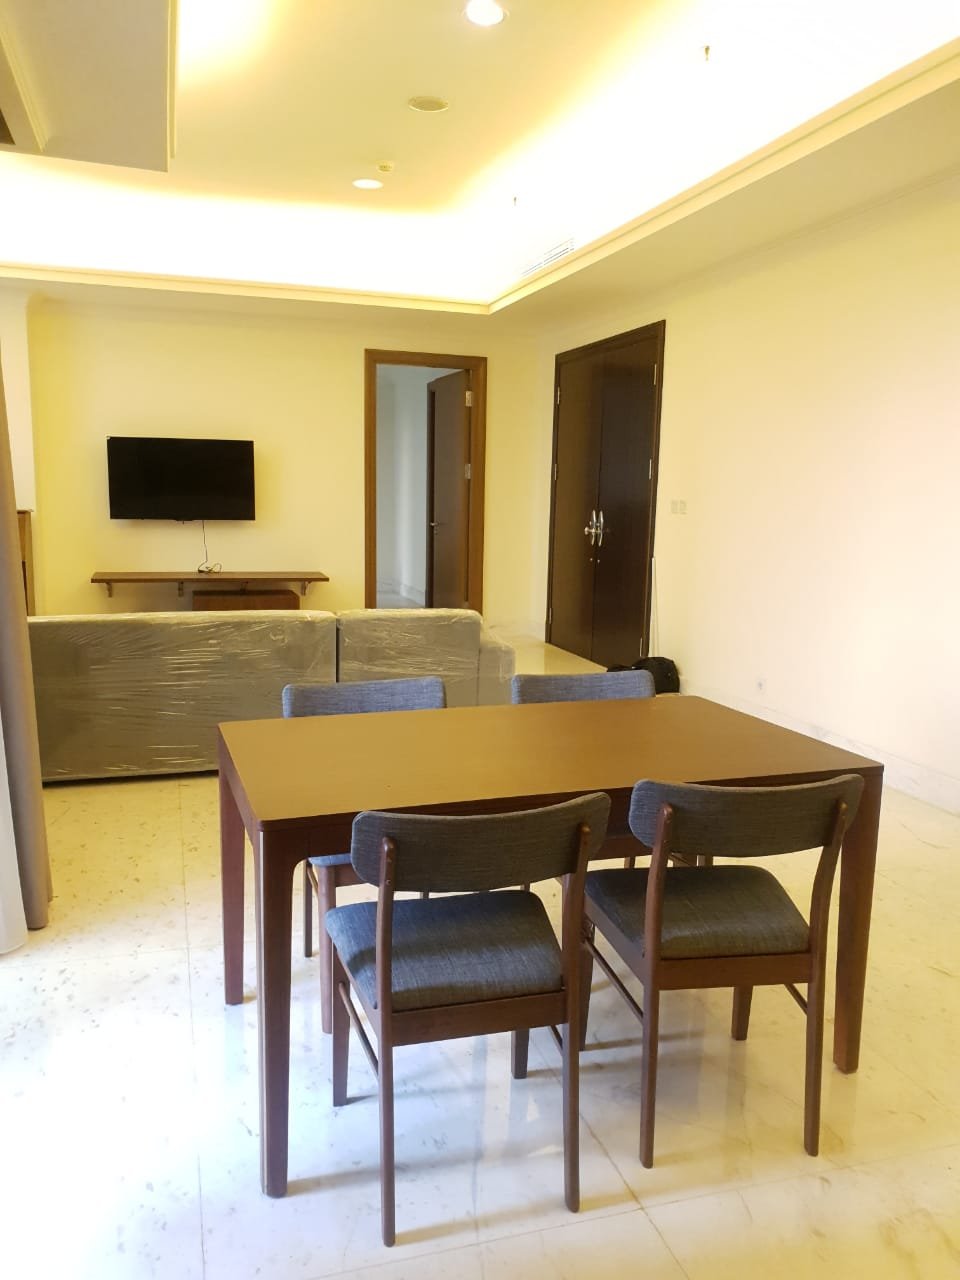 The Best Apartment to Live in Jakarta, Very Cozy and Awesome Gym and Other Facilities, 2 Bedrooms Size 157sqm, Fully Furnished, Just Renovated in Botanica